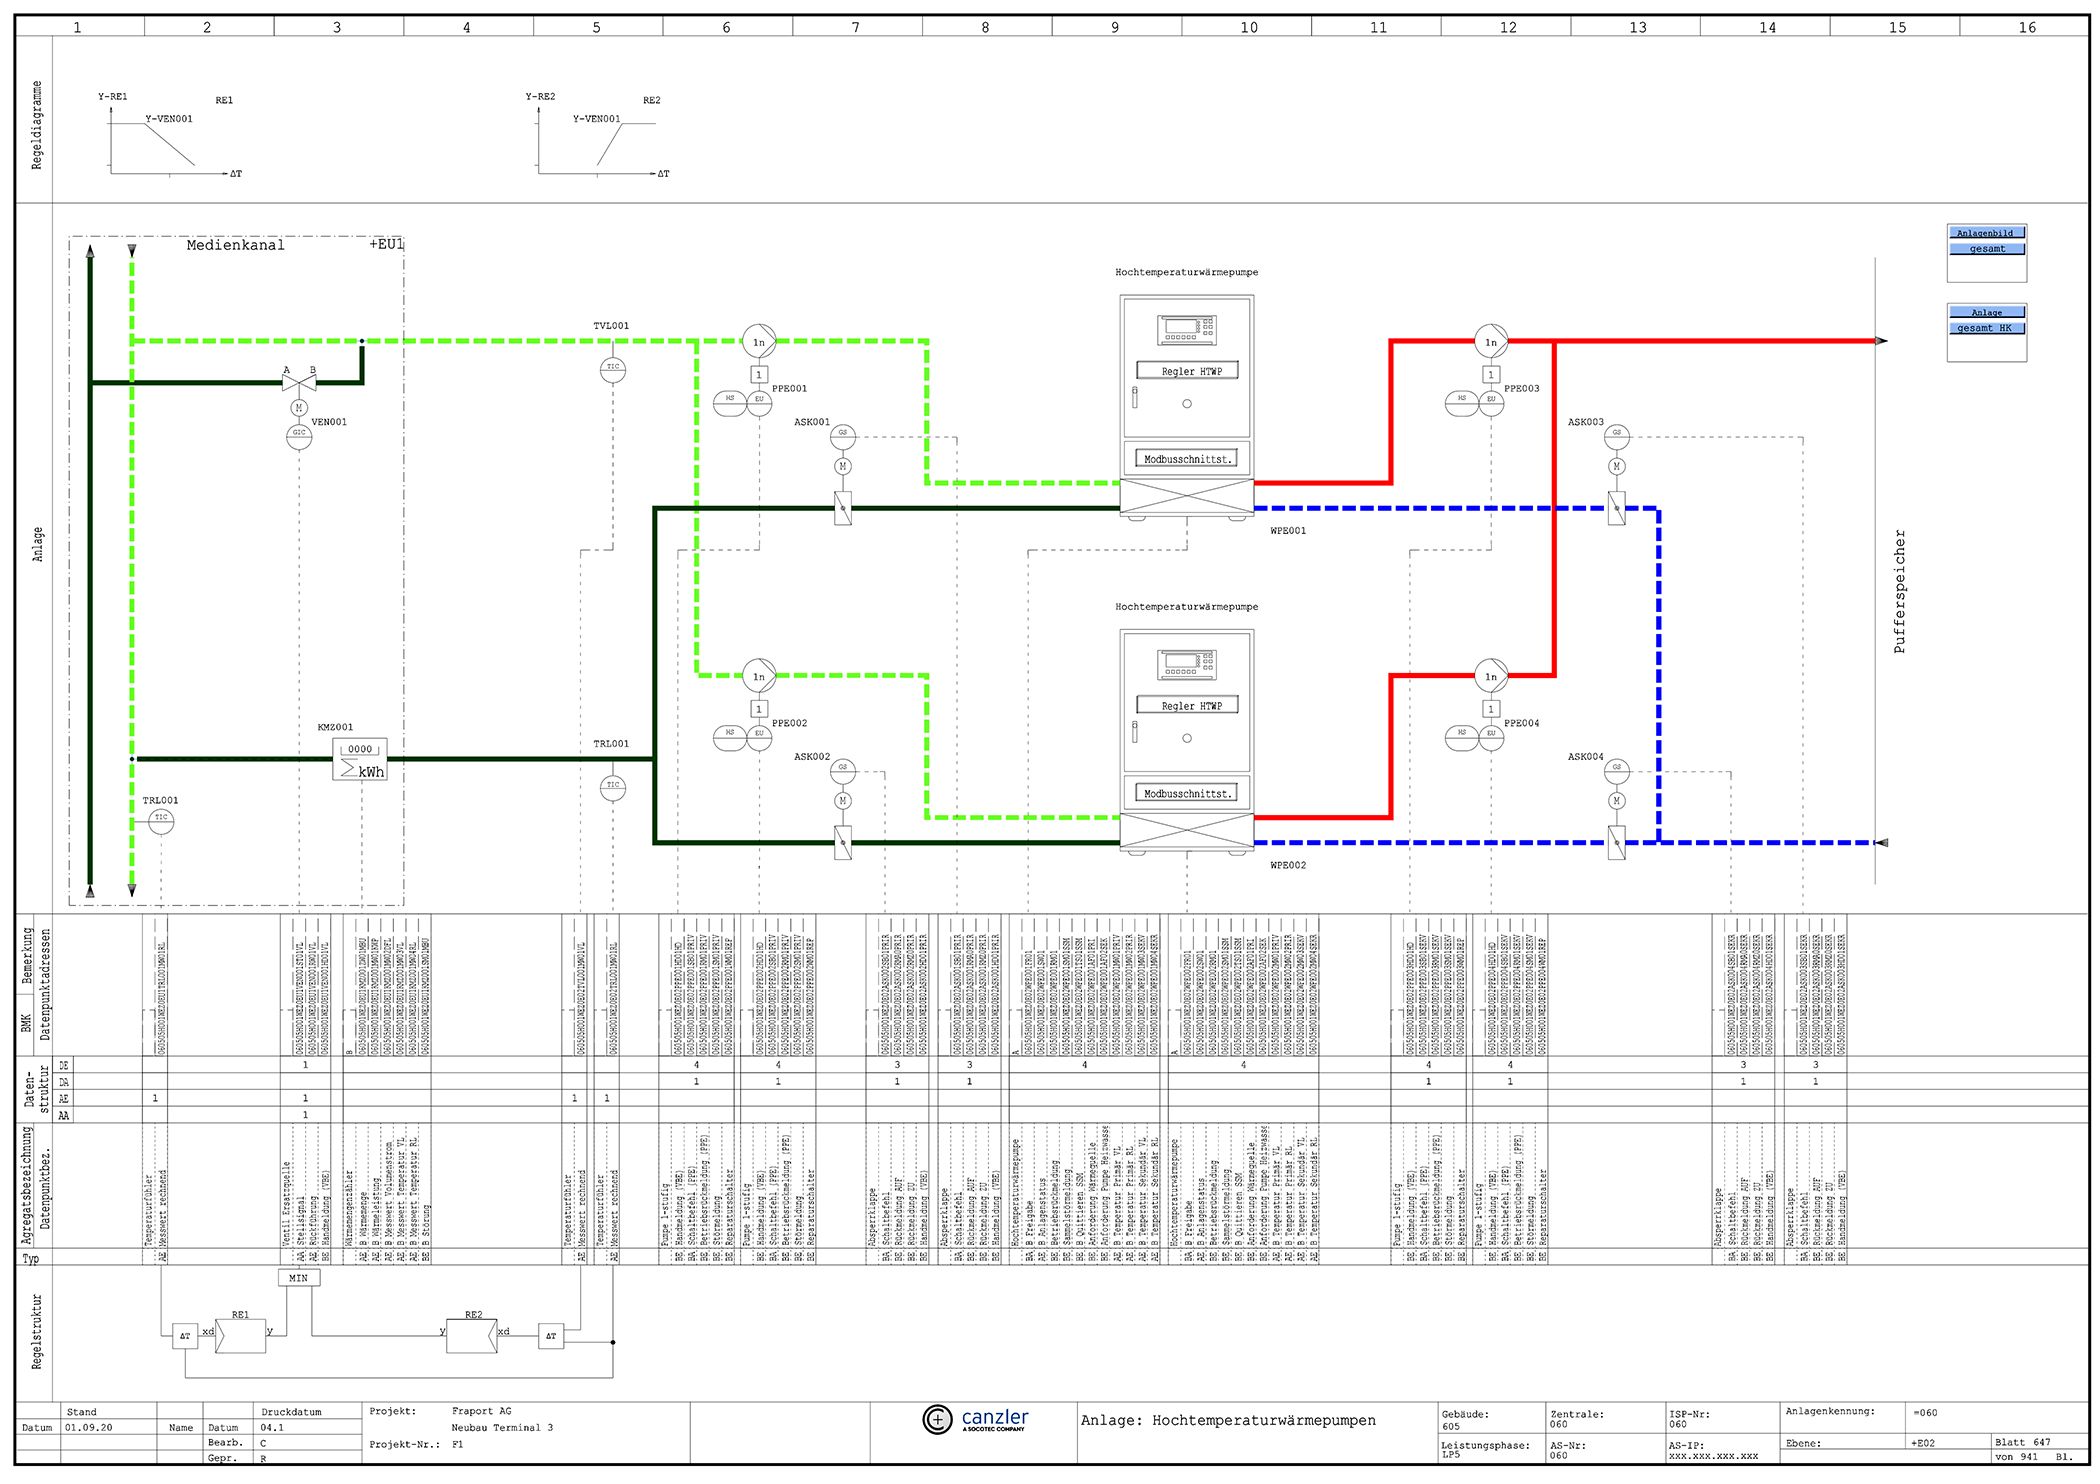 A key feature of WSCAD’s E-CAD software is the item referencing that enabled the entire air conditioning system to be designed in accordance with IEC 81346. [Source: CANZLER]